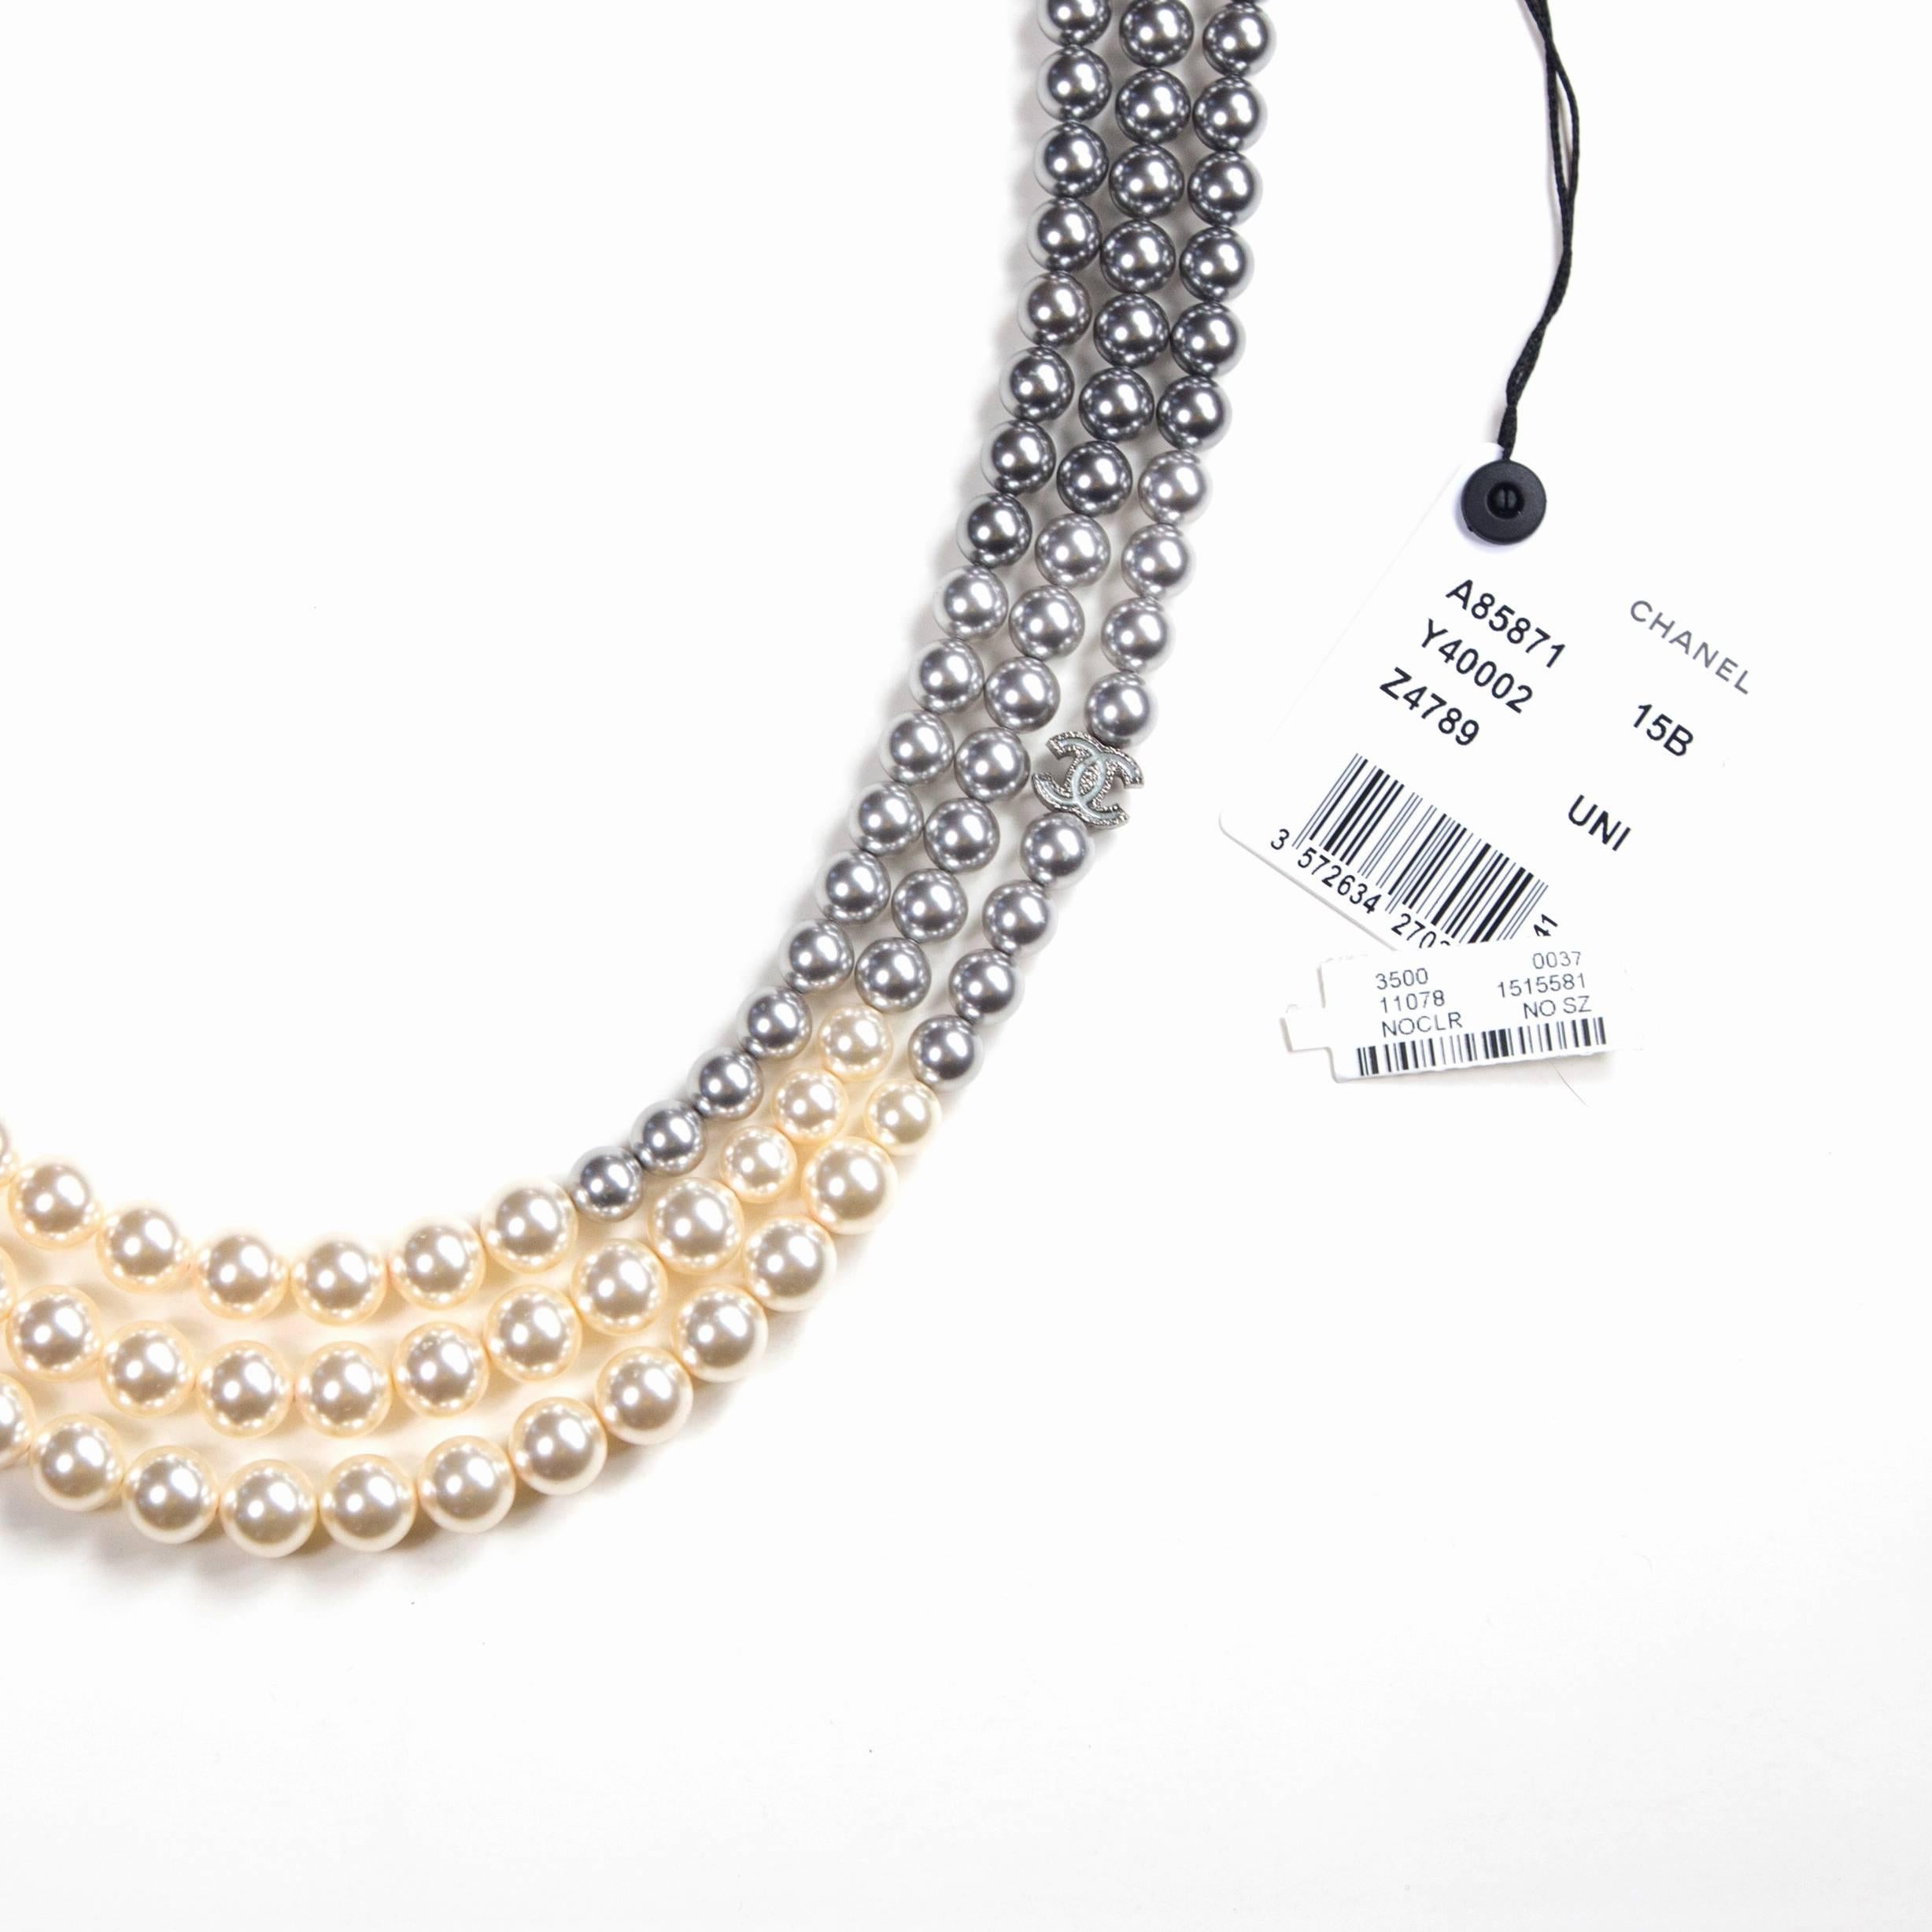 Chanel 2015 Pearl Ombre Necklace XL New Gradient Gray White Bead Multistrand CC 4